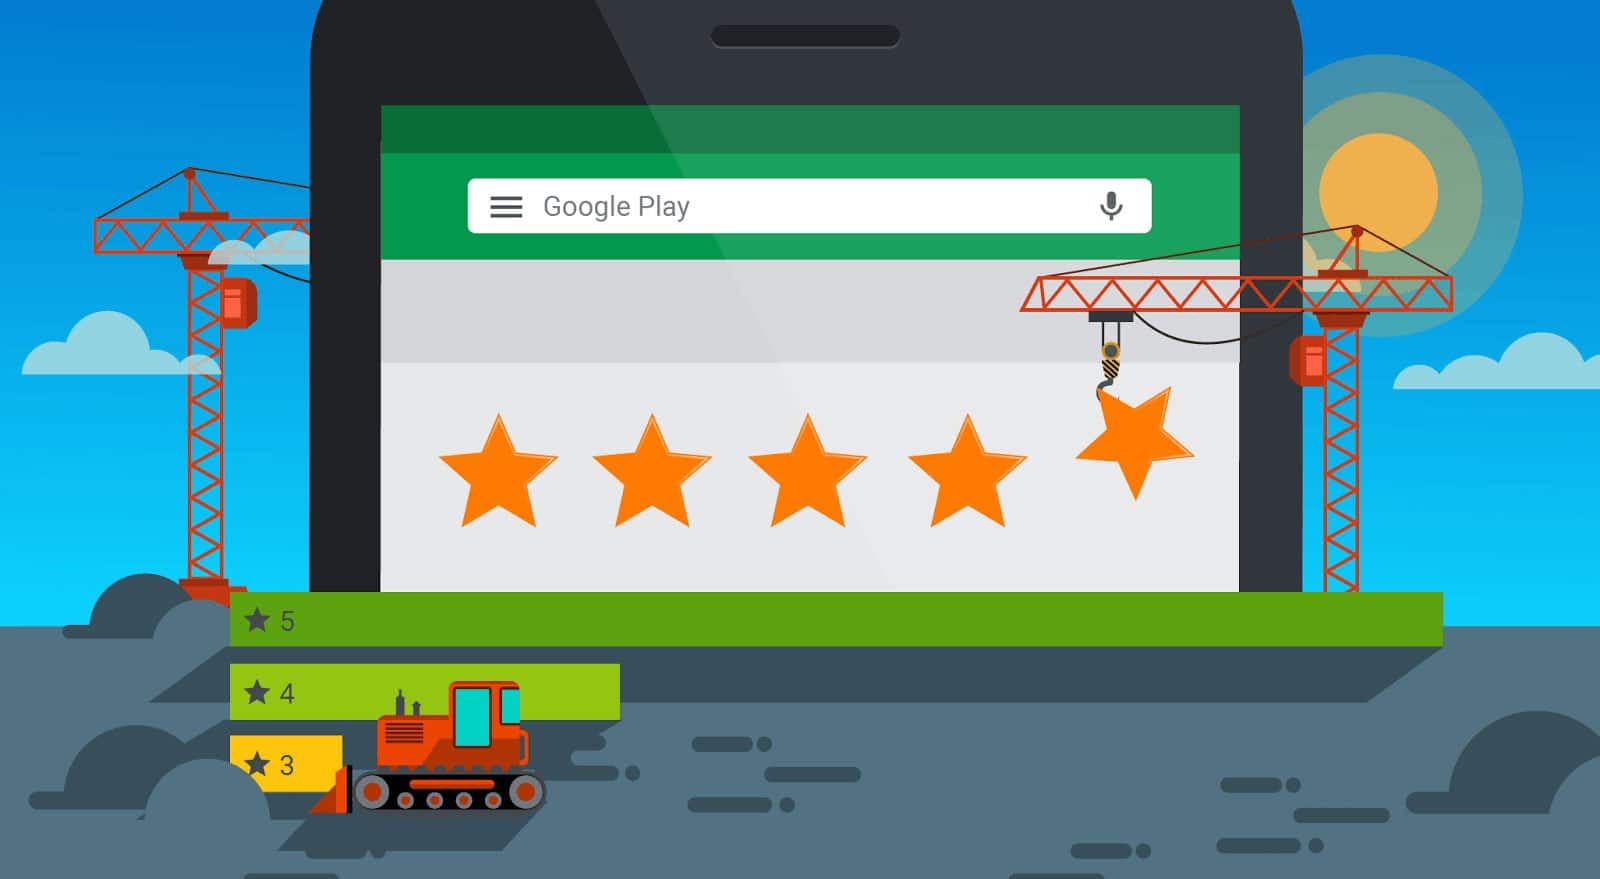 CallApp Increased Google Play App Ratings by 80% and Reduced Negative Feedback by 70%. Here’s How.